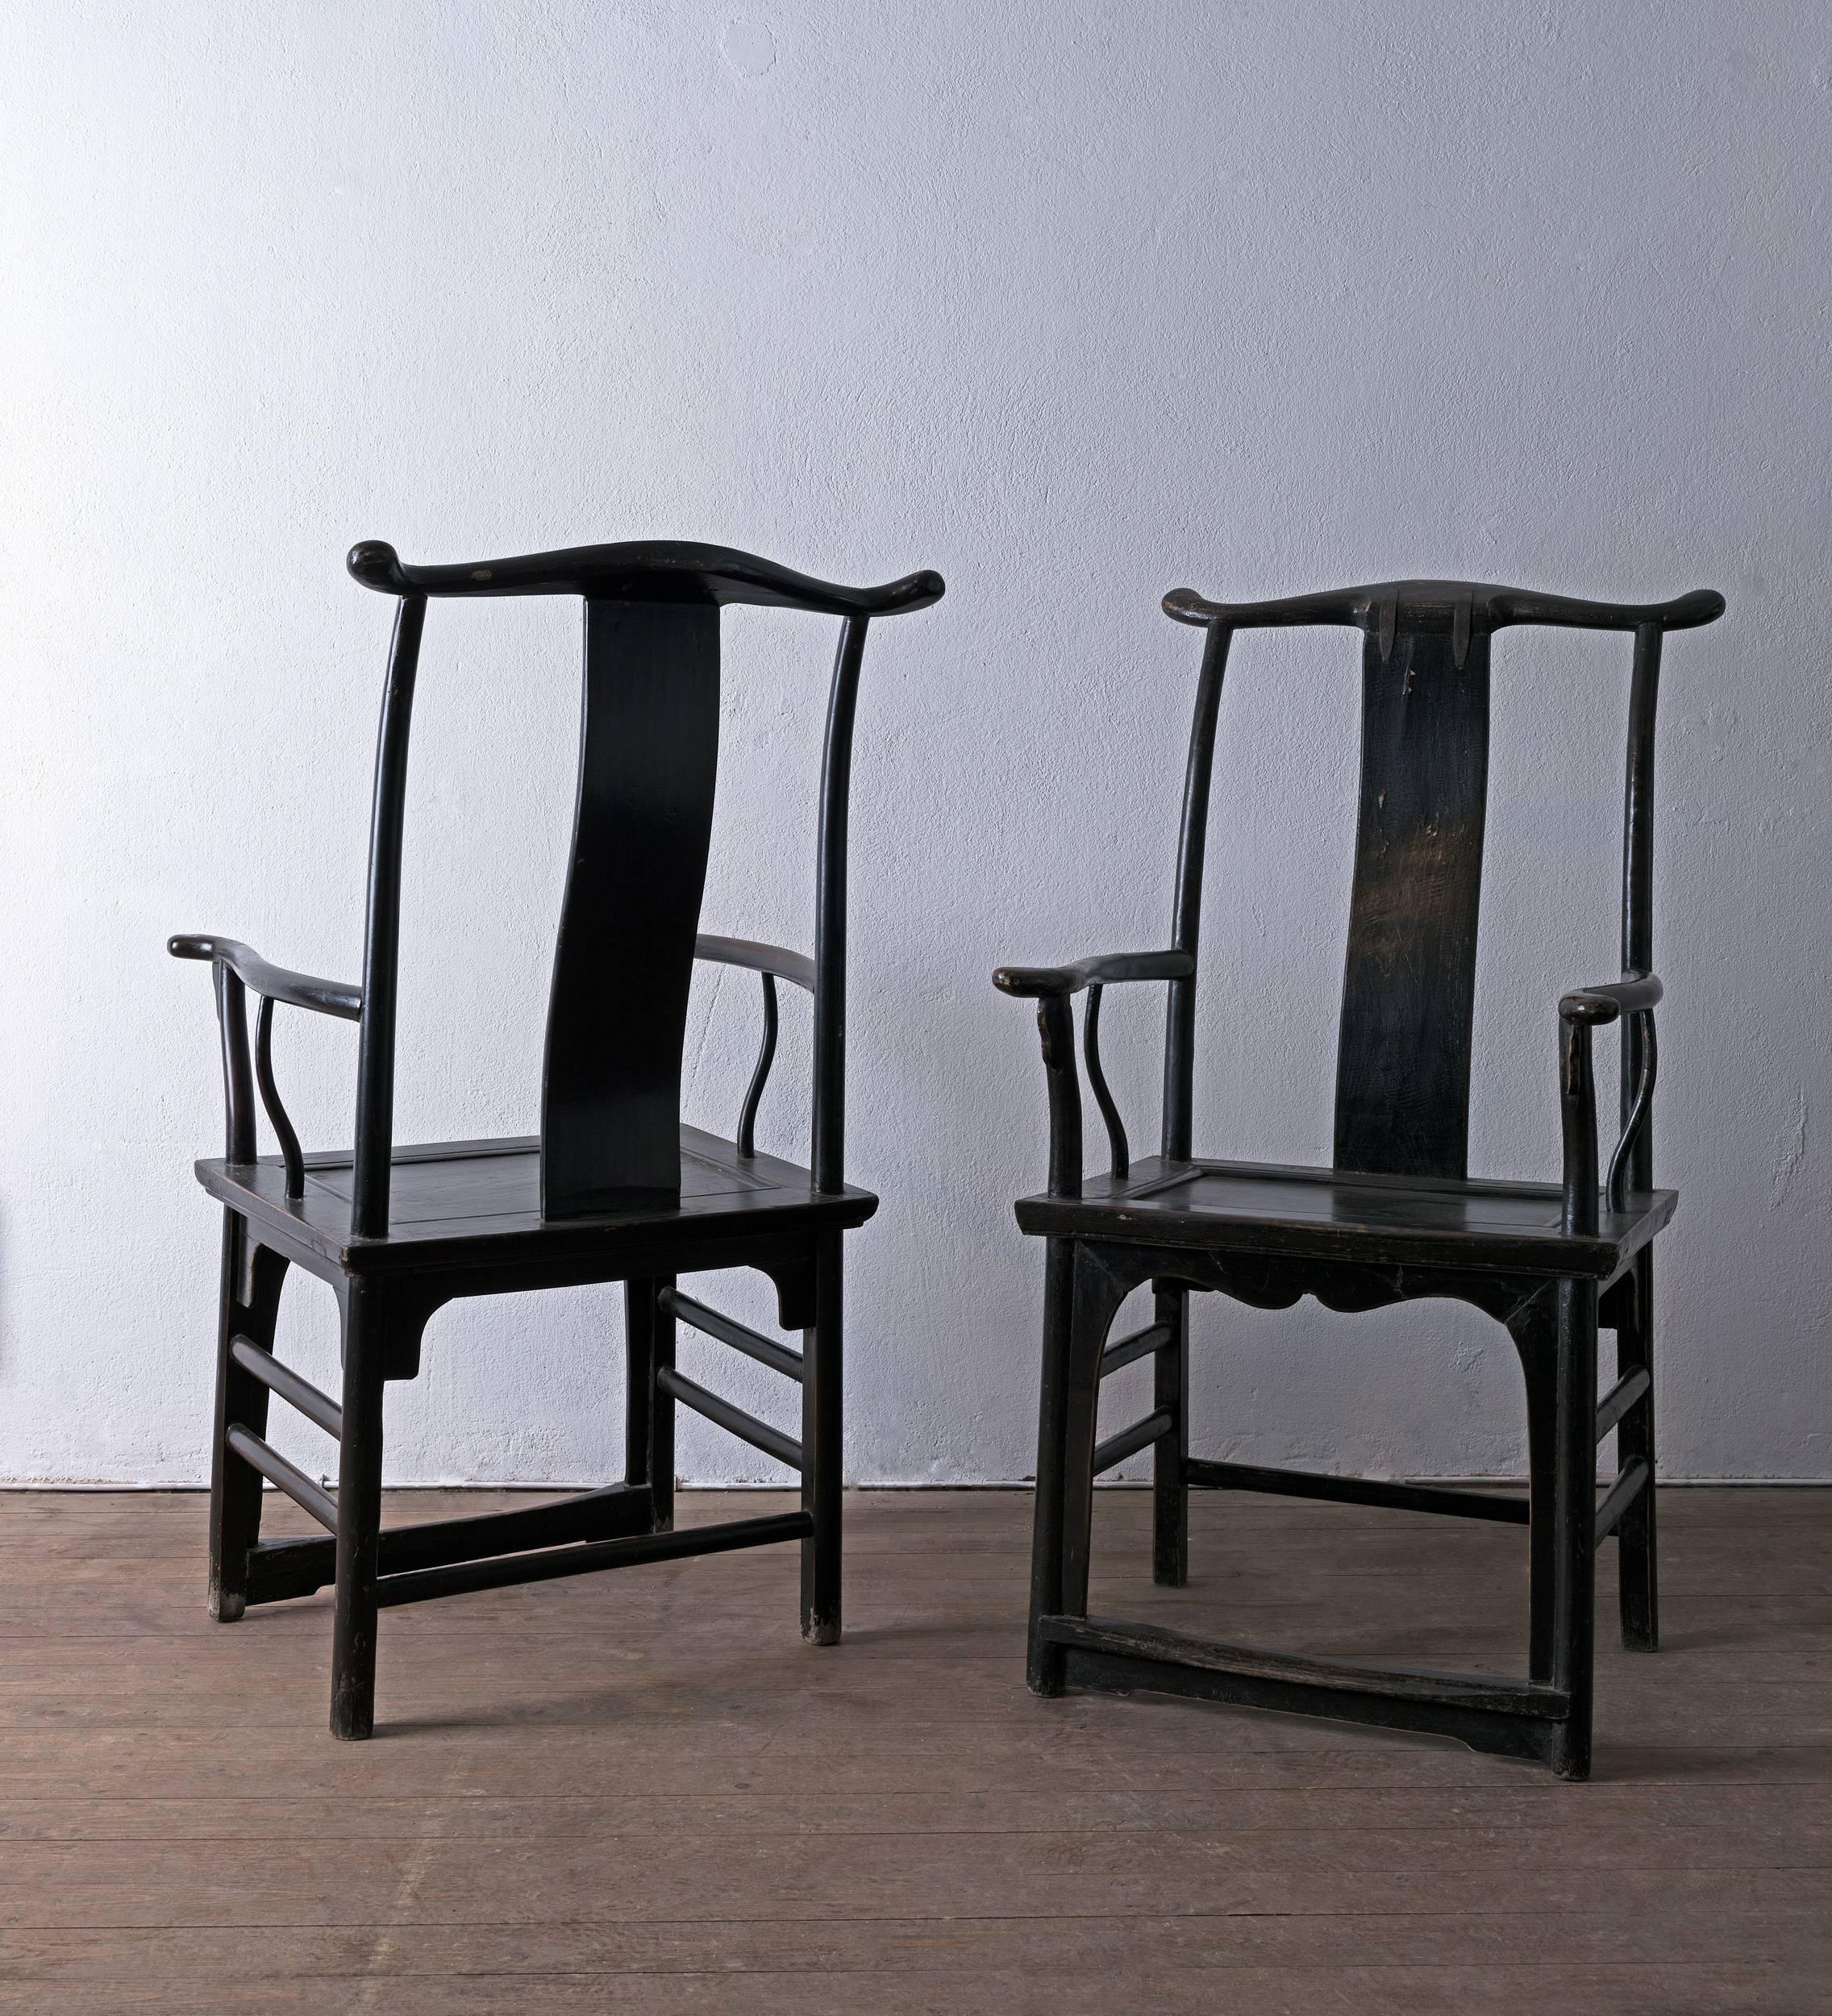 Very sculptural black painted chinese armchairs. Great visual impact and the perfect accent pieces.